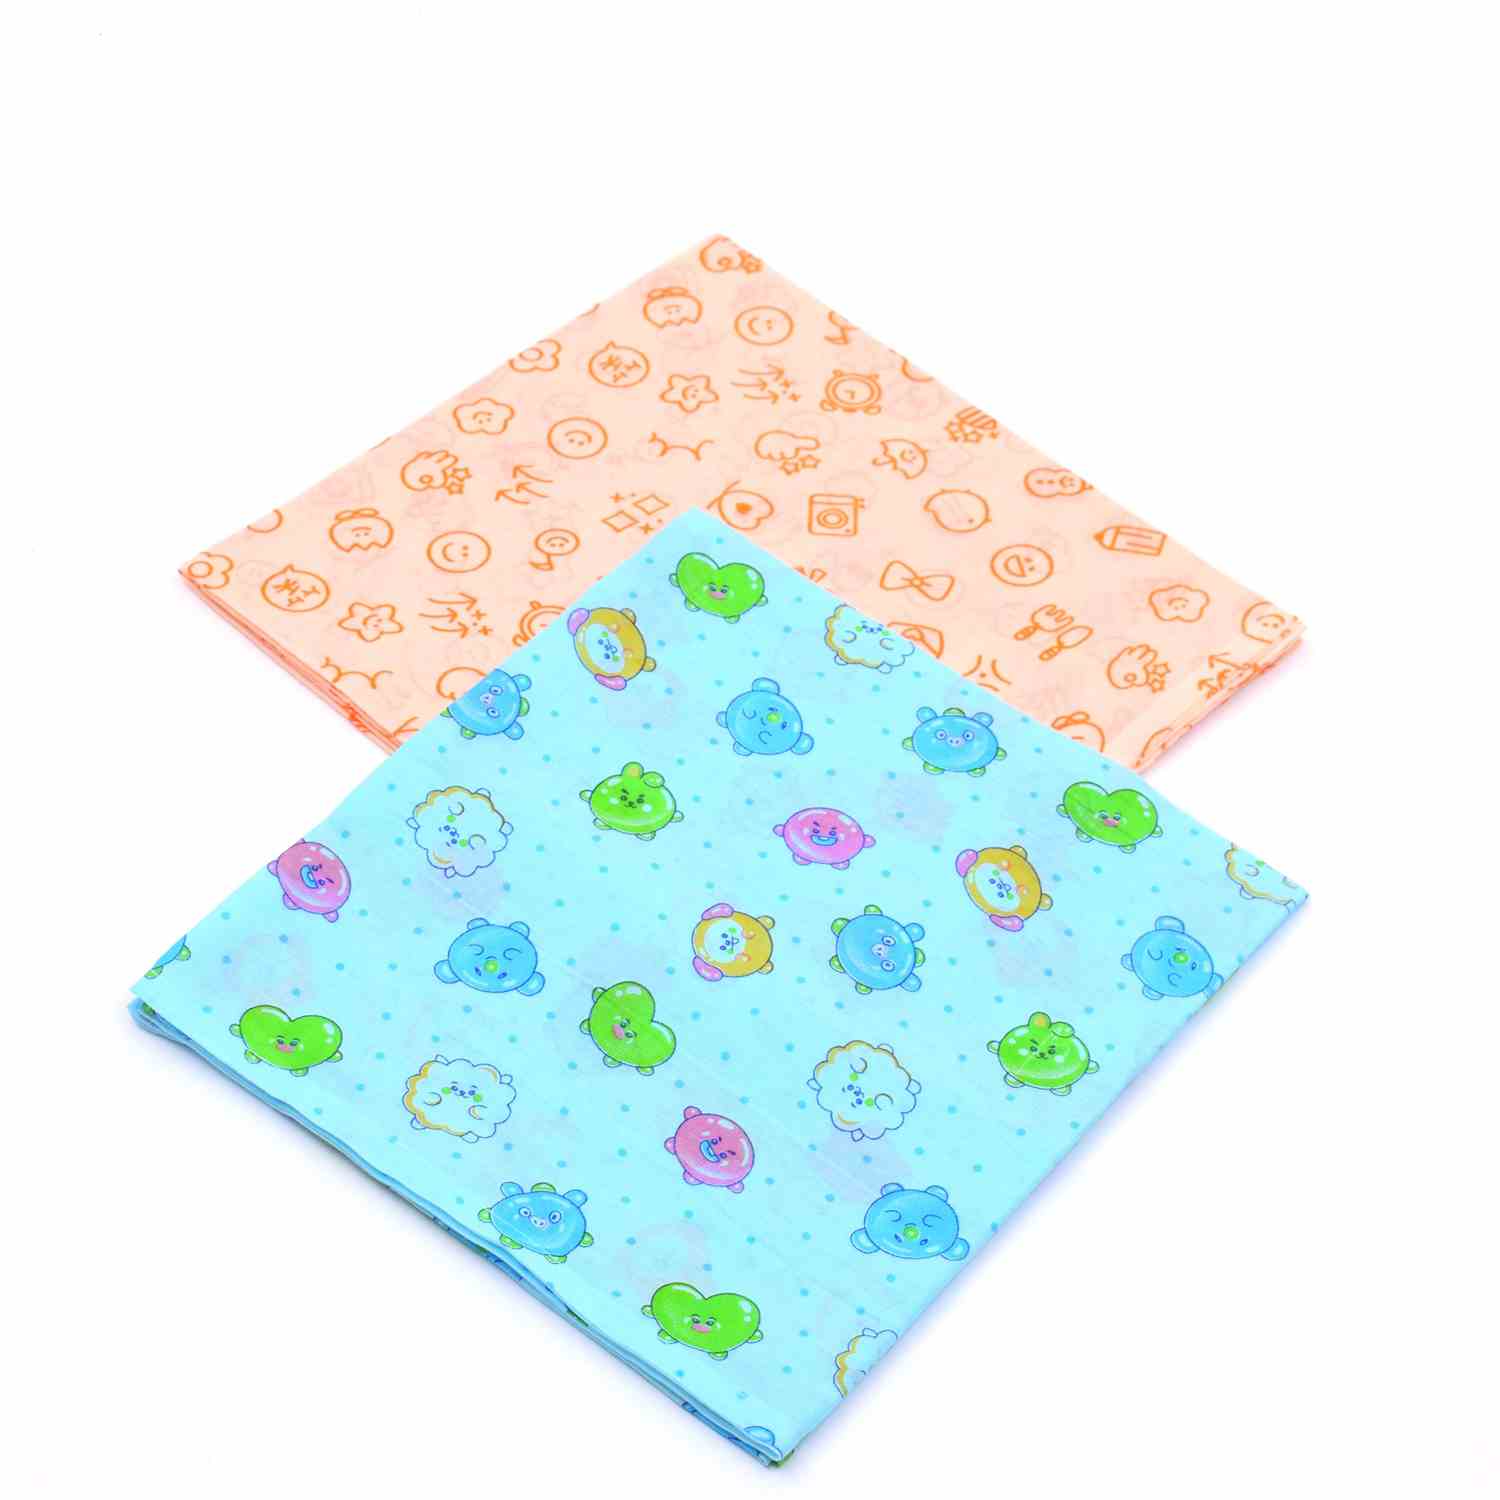 Cotton(Muslin) Wrapper with Smiley Print Orange & Animal Print Blue Pack of 2, 0+m Age